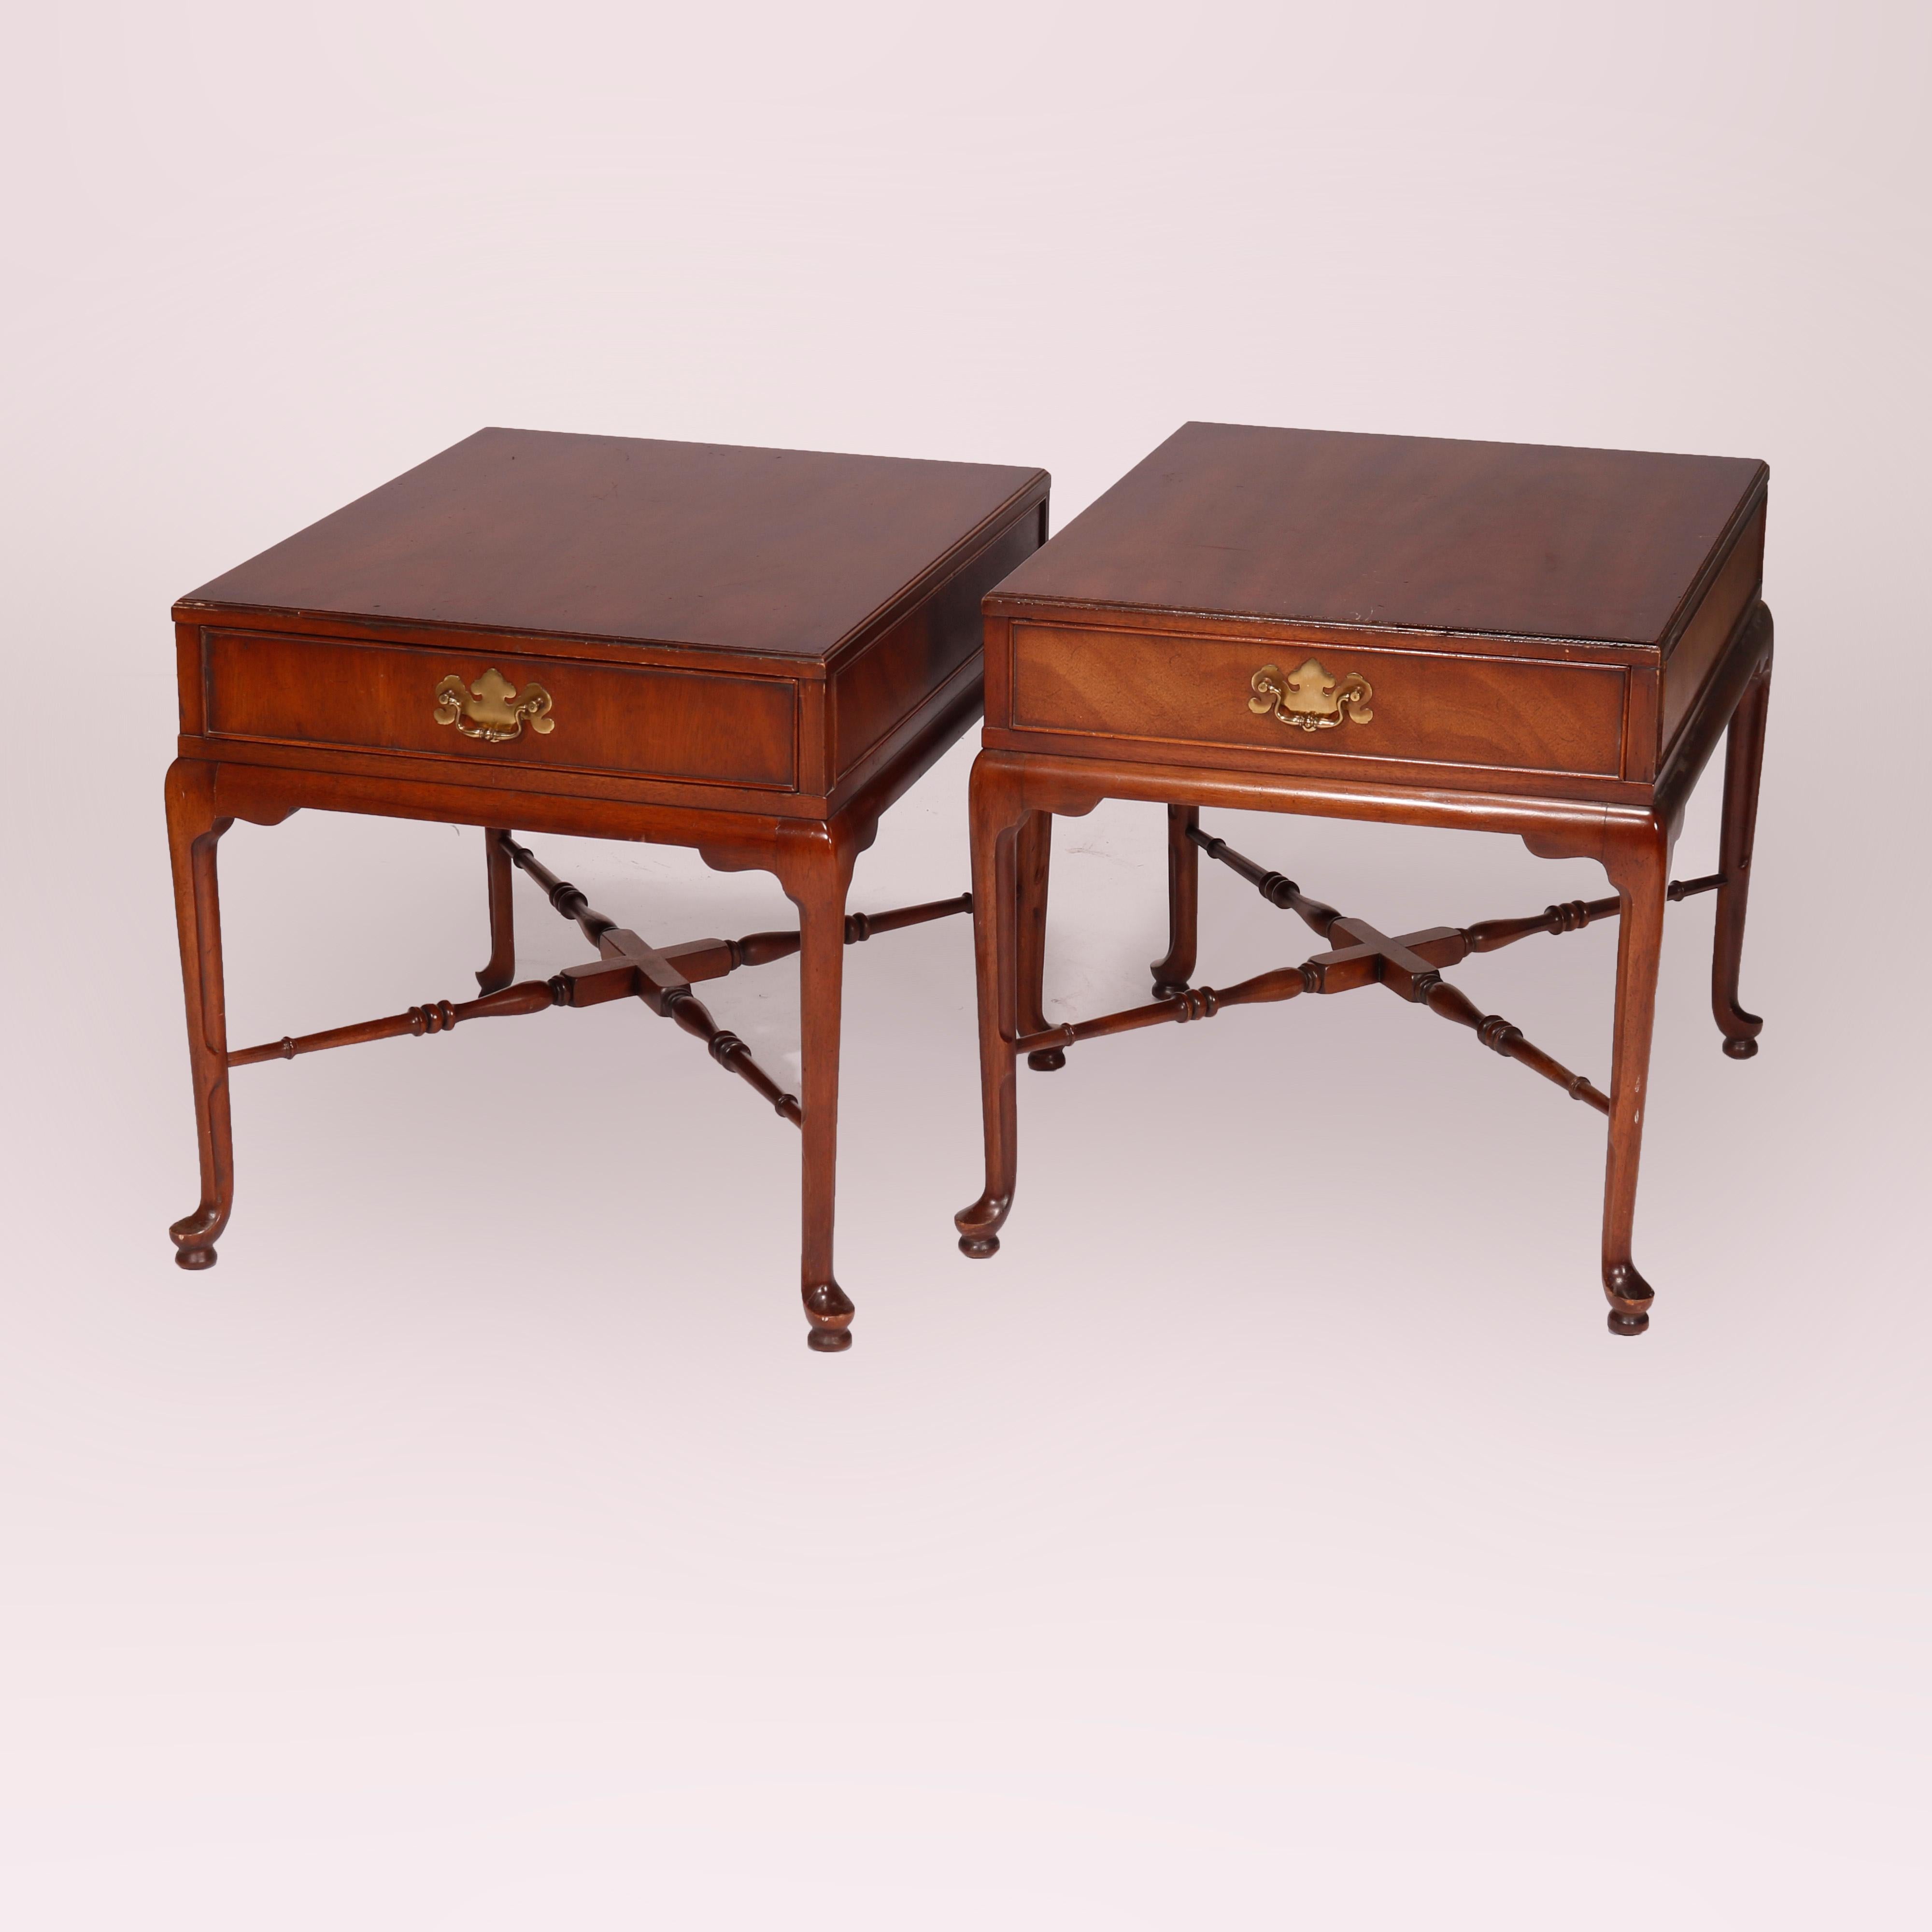 American Pair Queen Anne Style Heritage Signers Collection Walnut Side Tables, 20th C